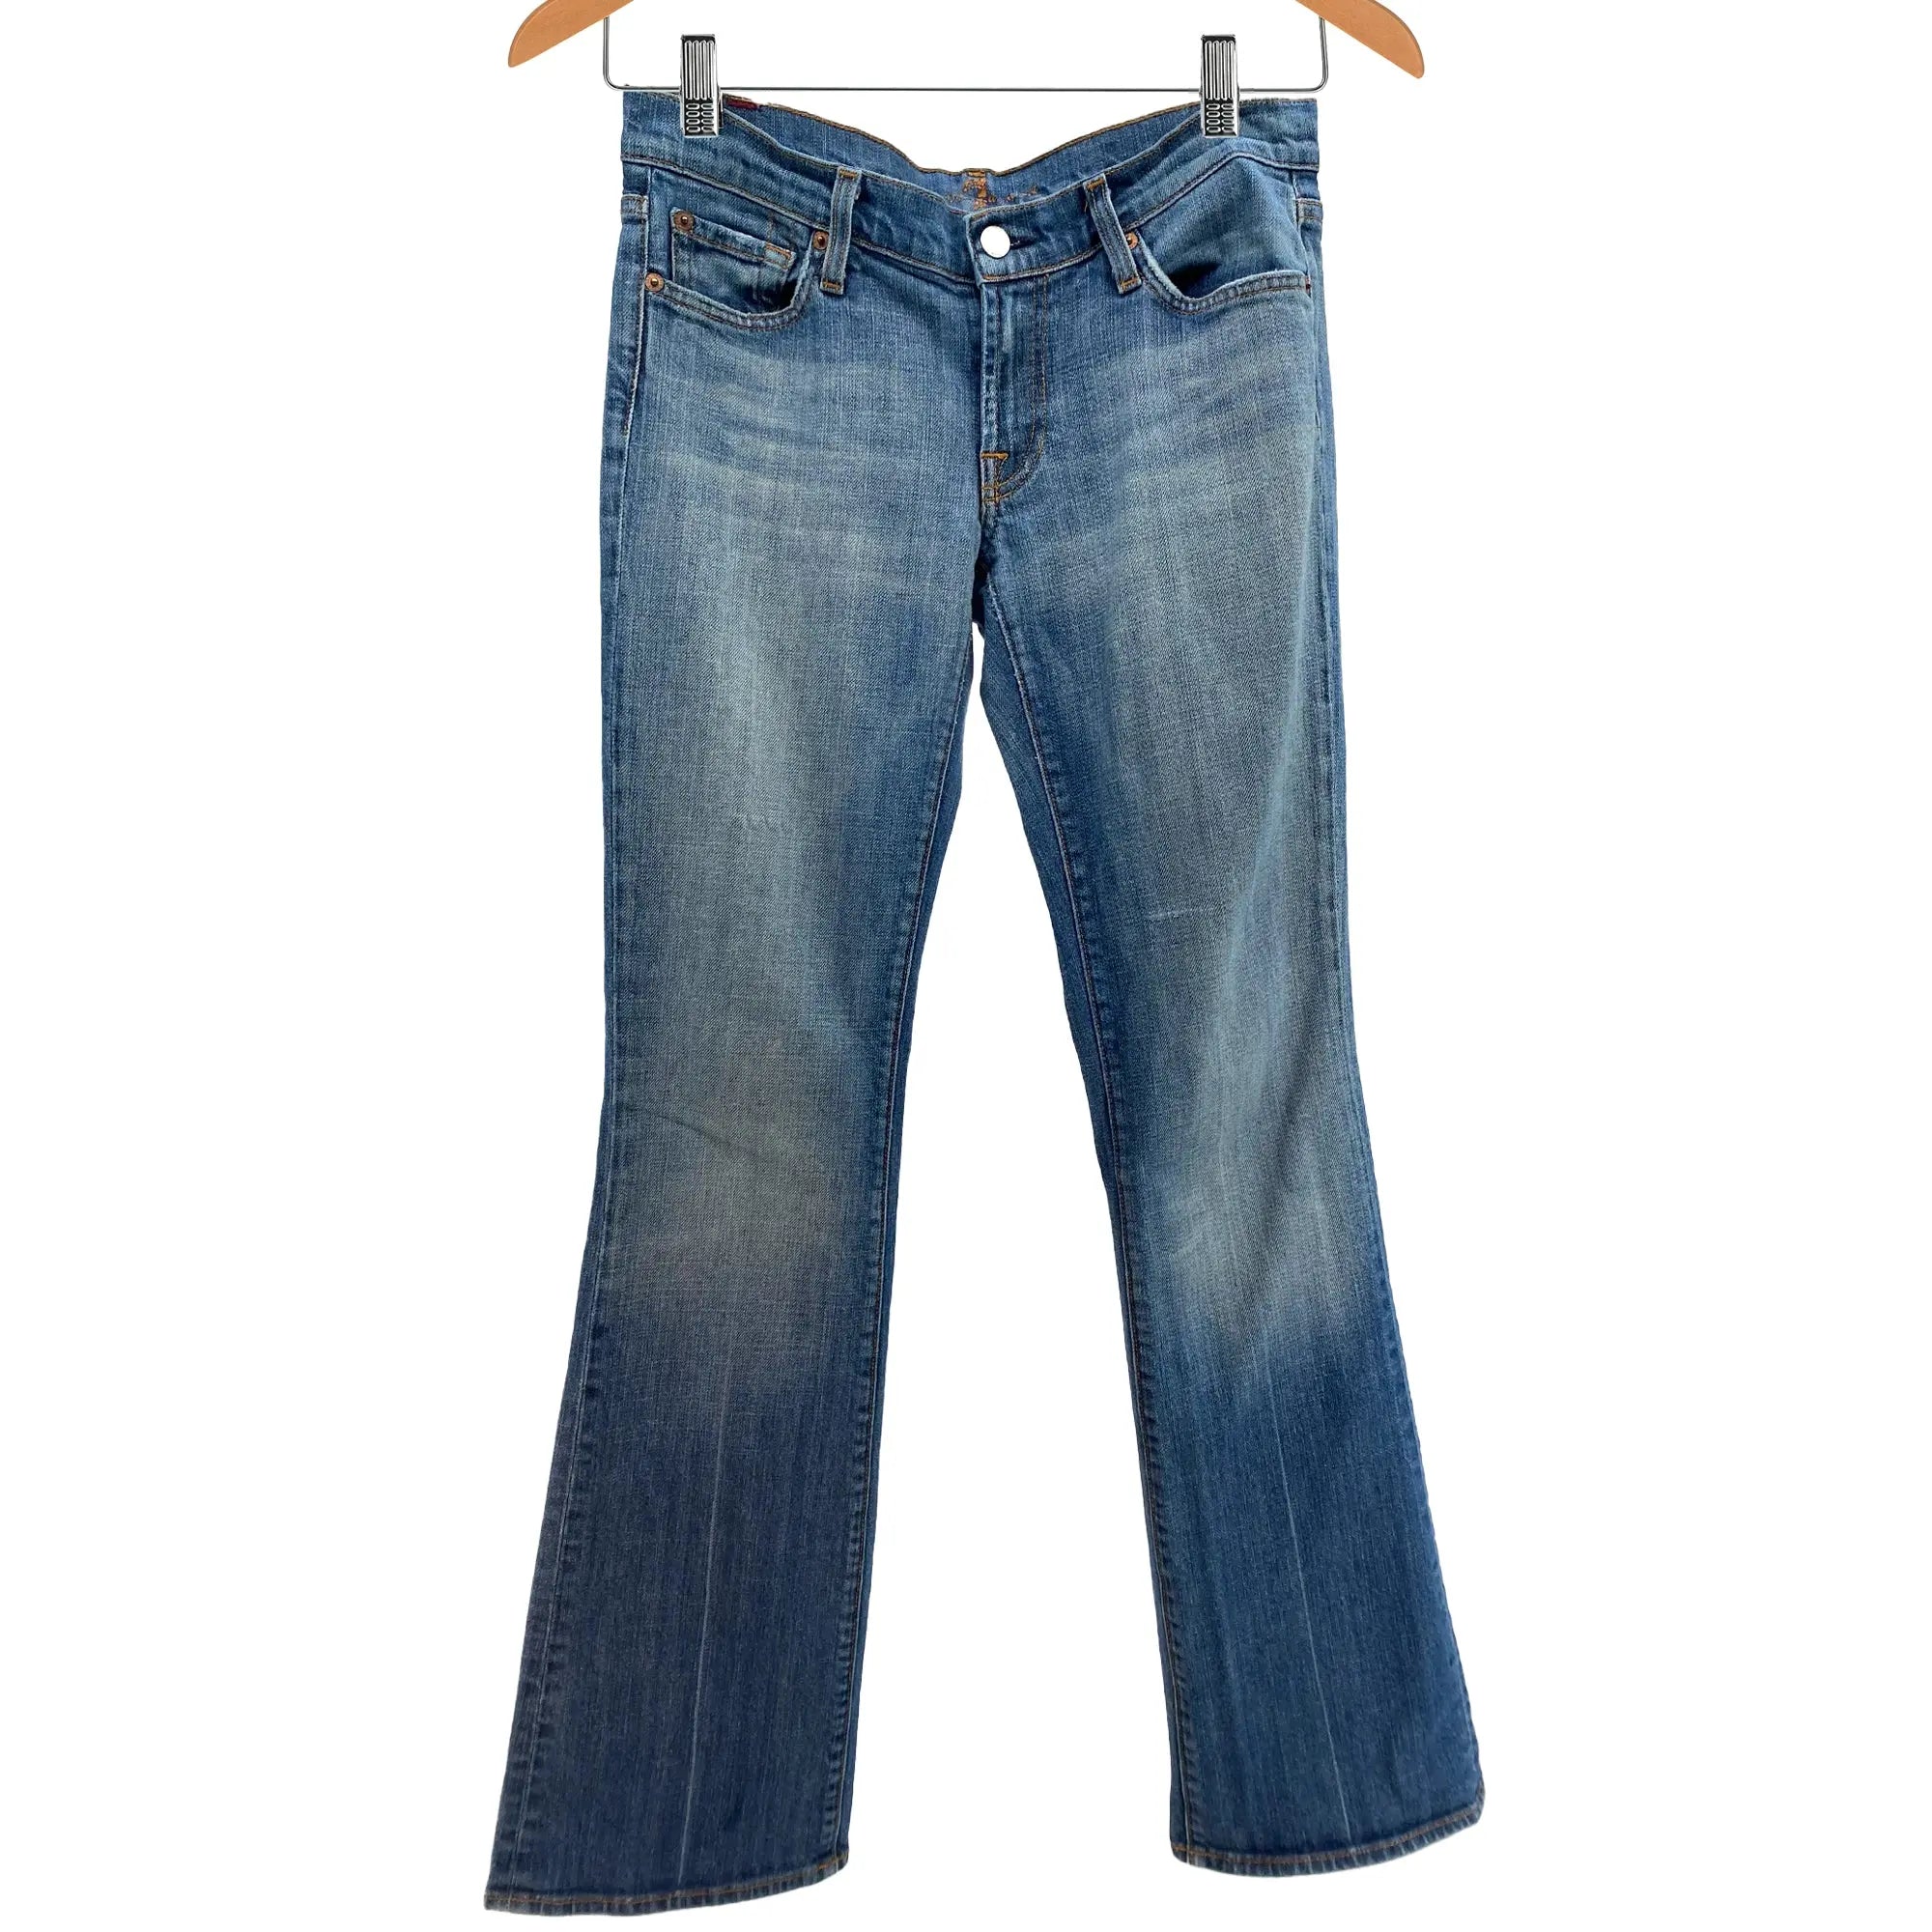 7 For All Mankind - Bootcut - Women's 28 Great Lakes Reclaimed Denim